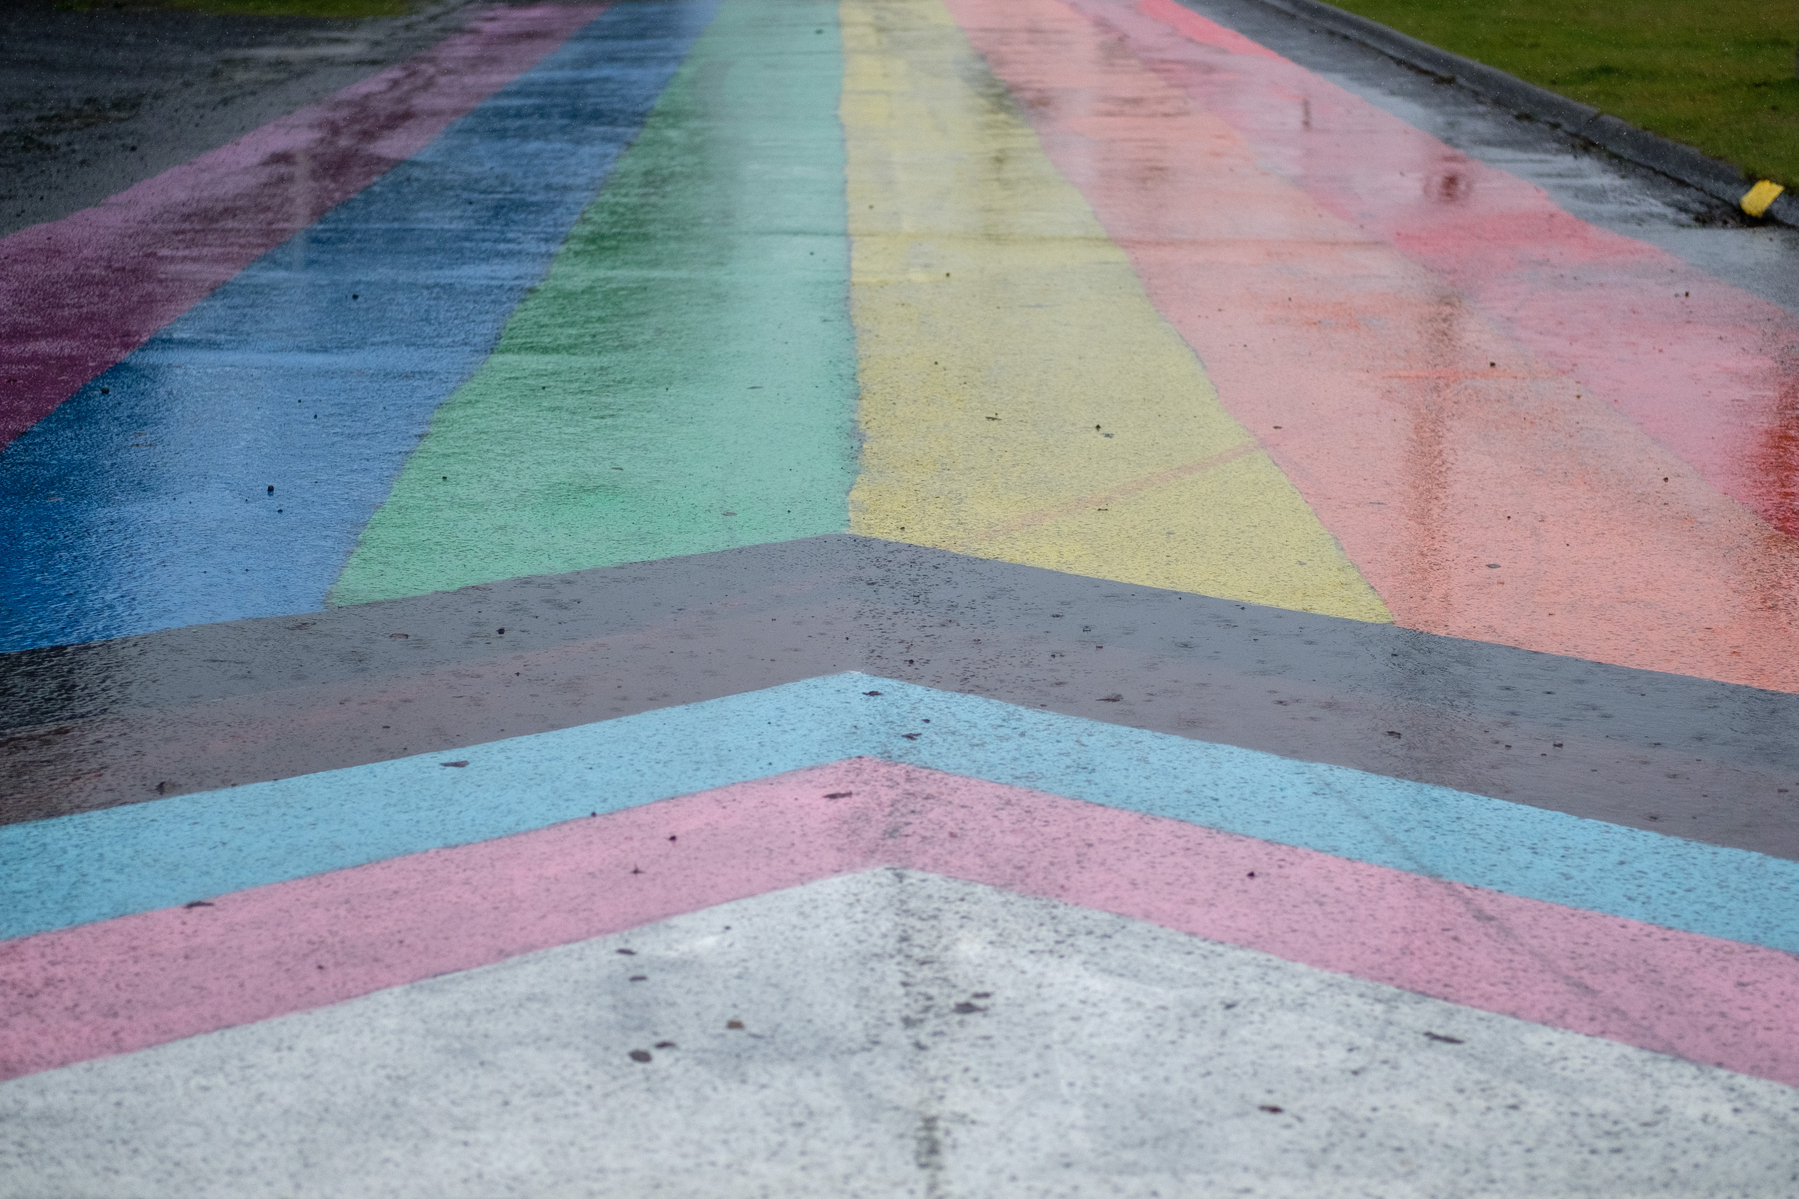 The local pride flag street painting looks okay in bad weather, actually.